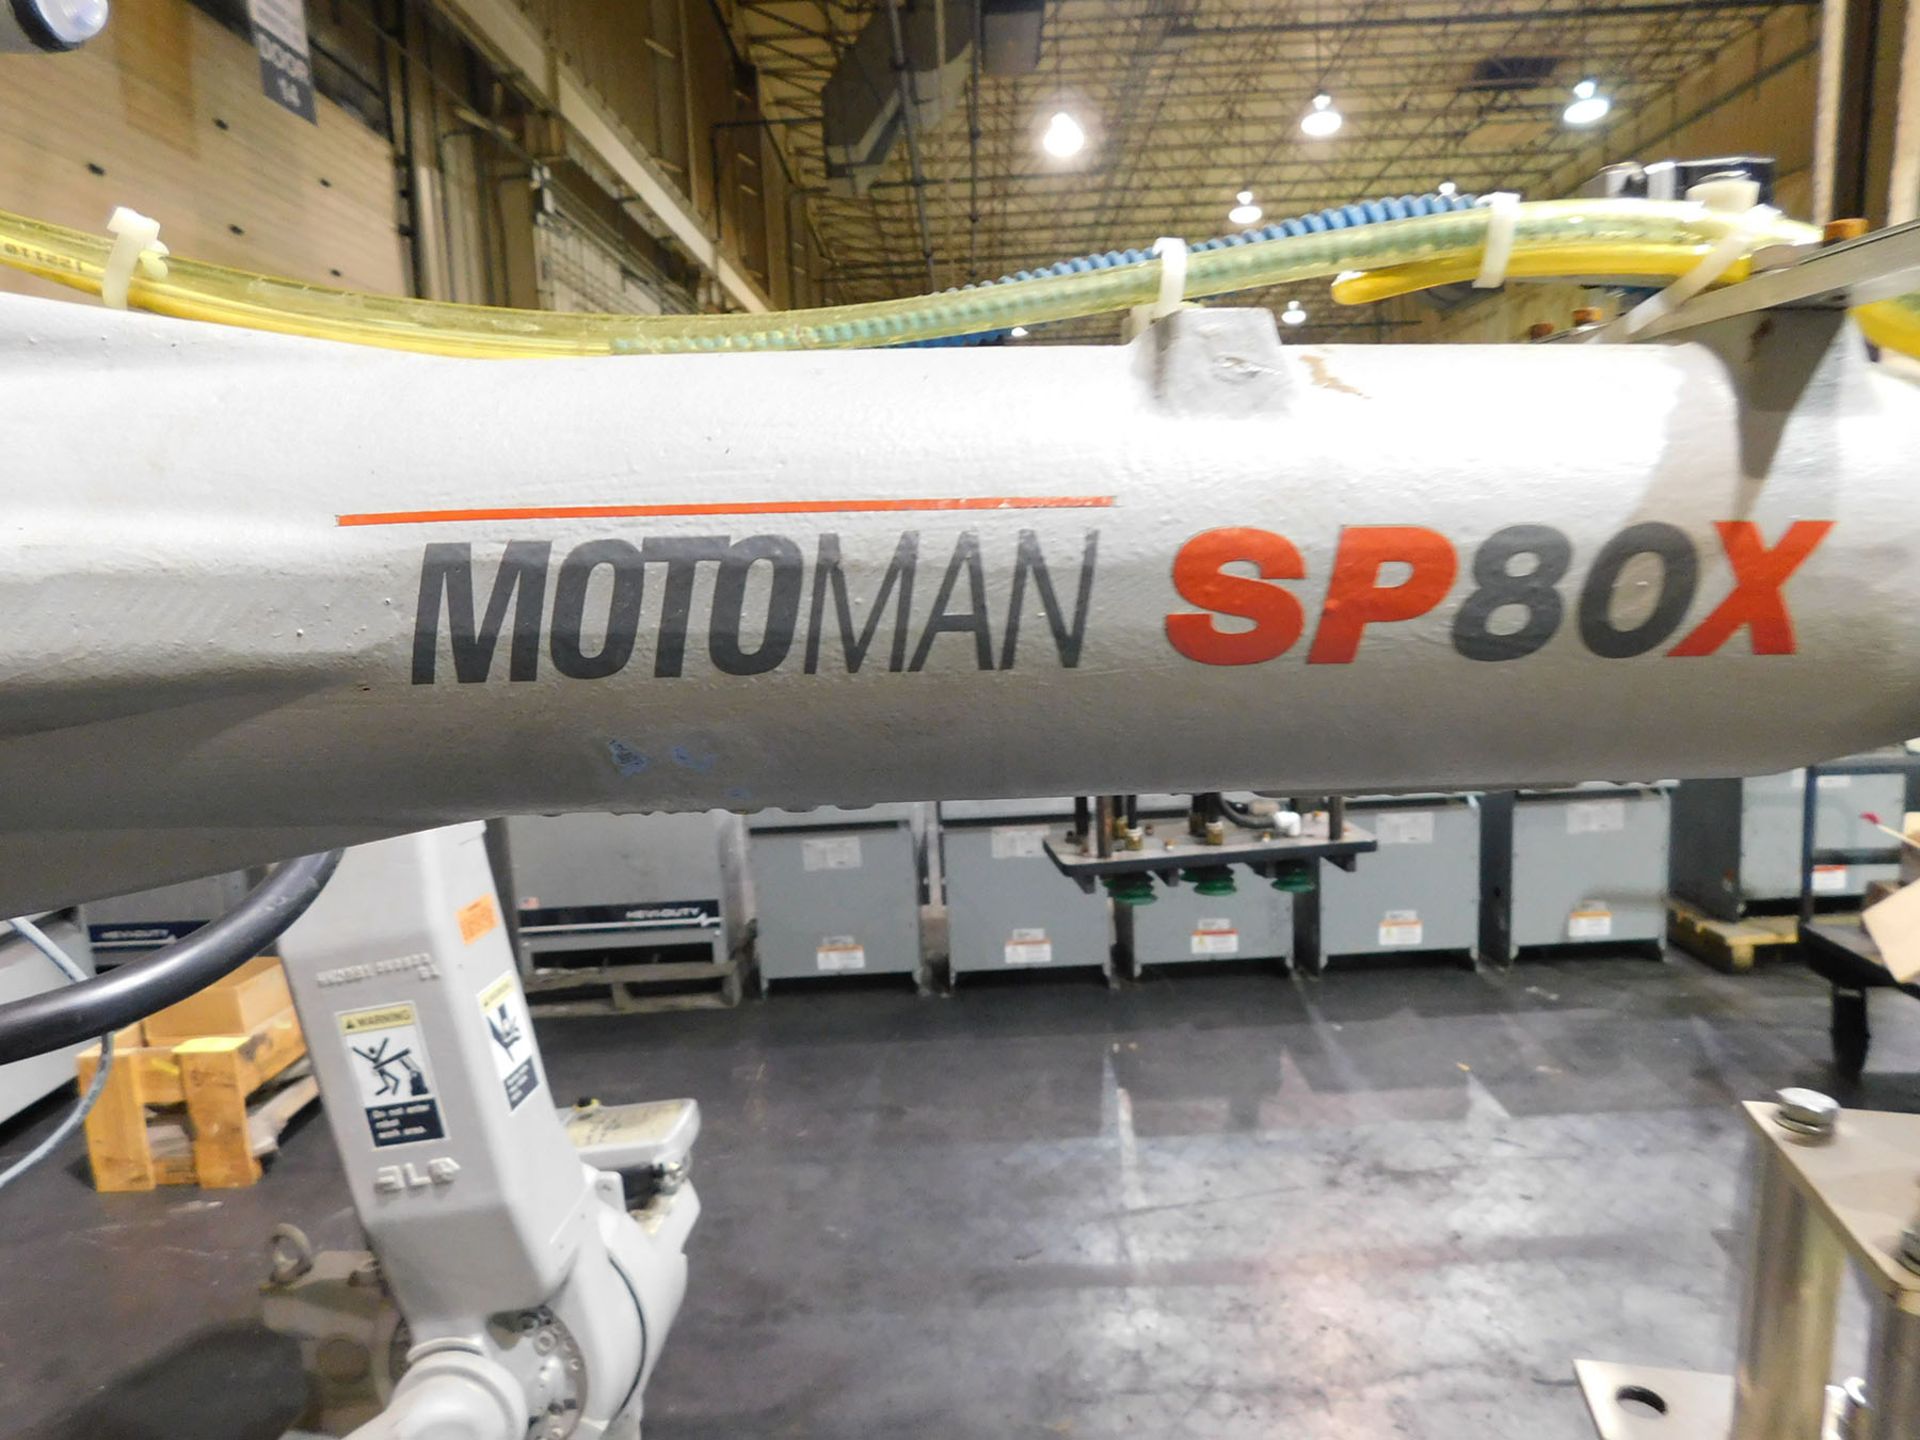 MOTOMAN SP80X ROBOT; S/N S4M039-1-2, 80-KG PAYLOAD, DATE 2004.07 - Image 3 of 4